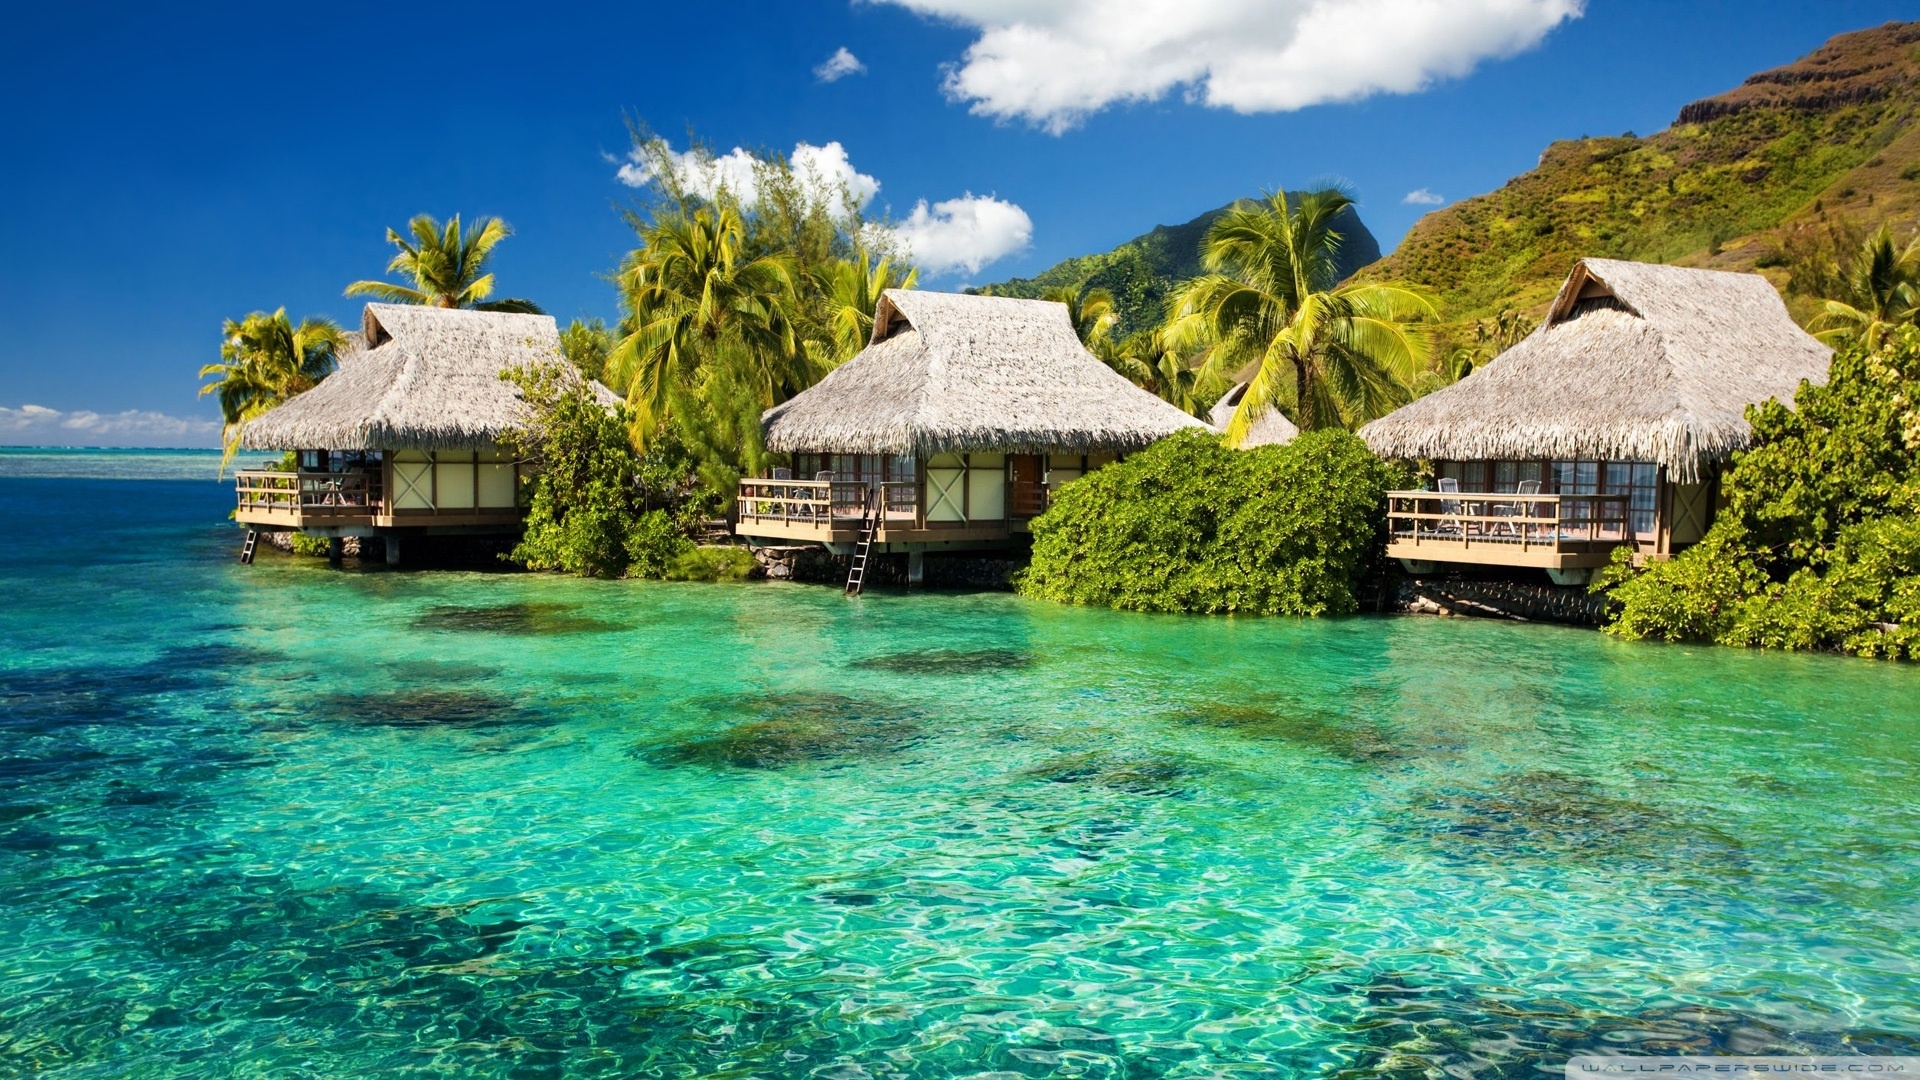 Beach Bungalows On The Tropical Island Wallpaper Beach Wallpapers ...